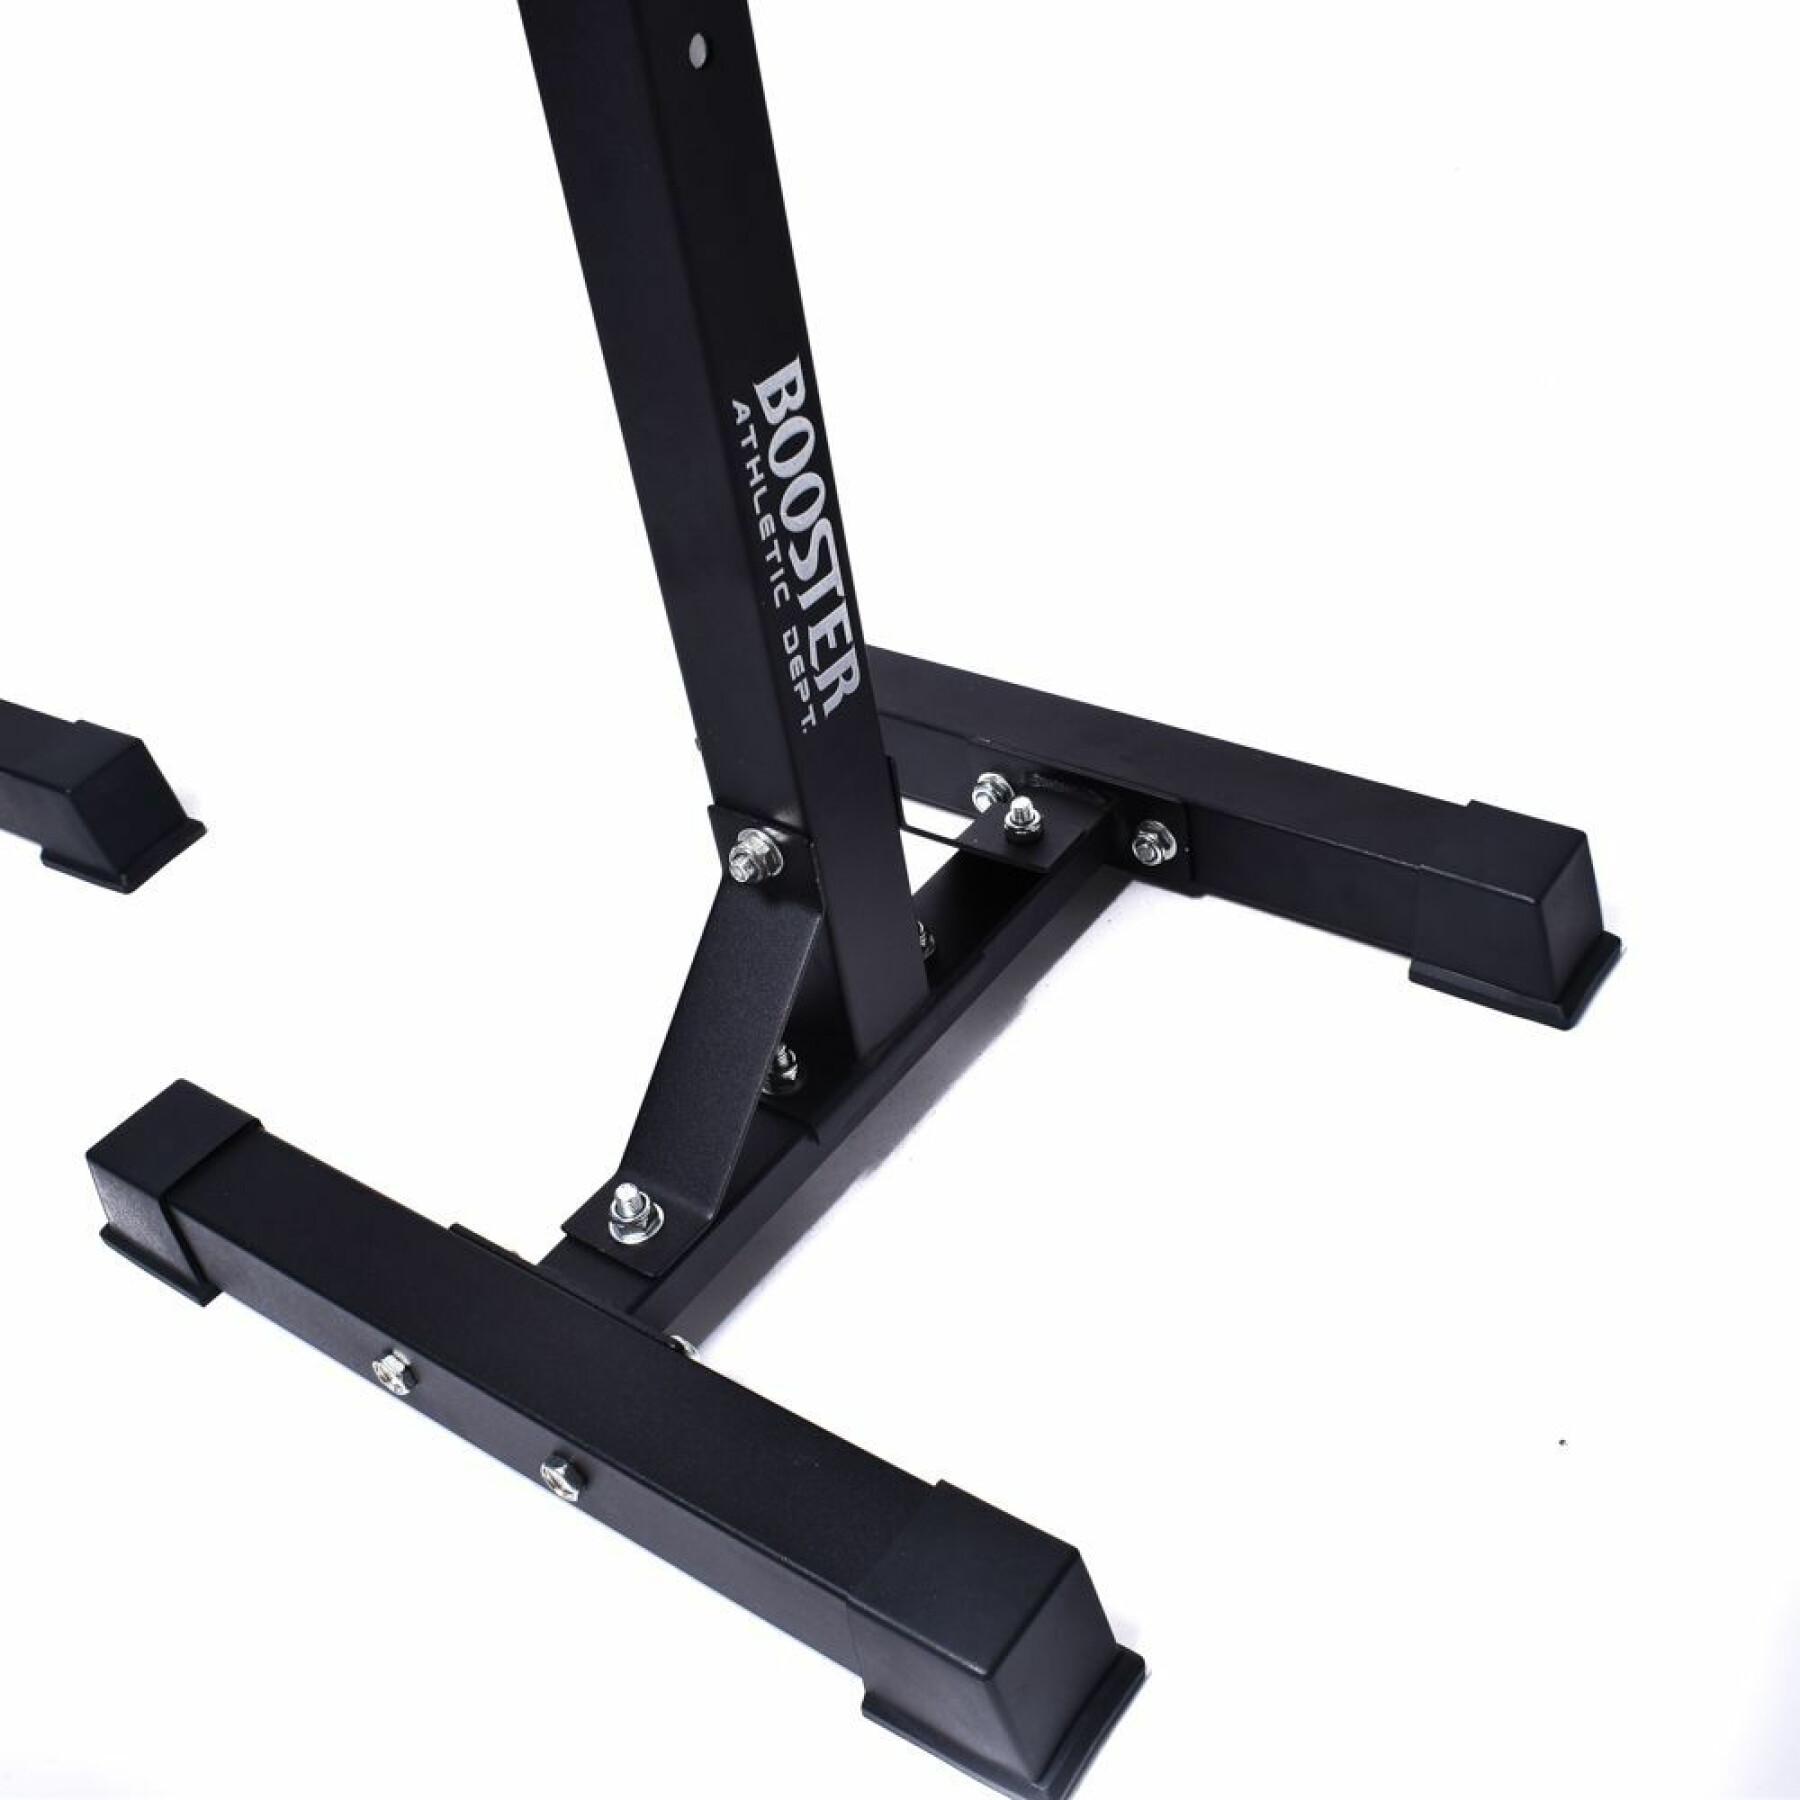 Support de barre Booster Fight Gear Squat stand